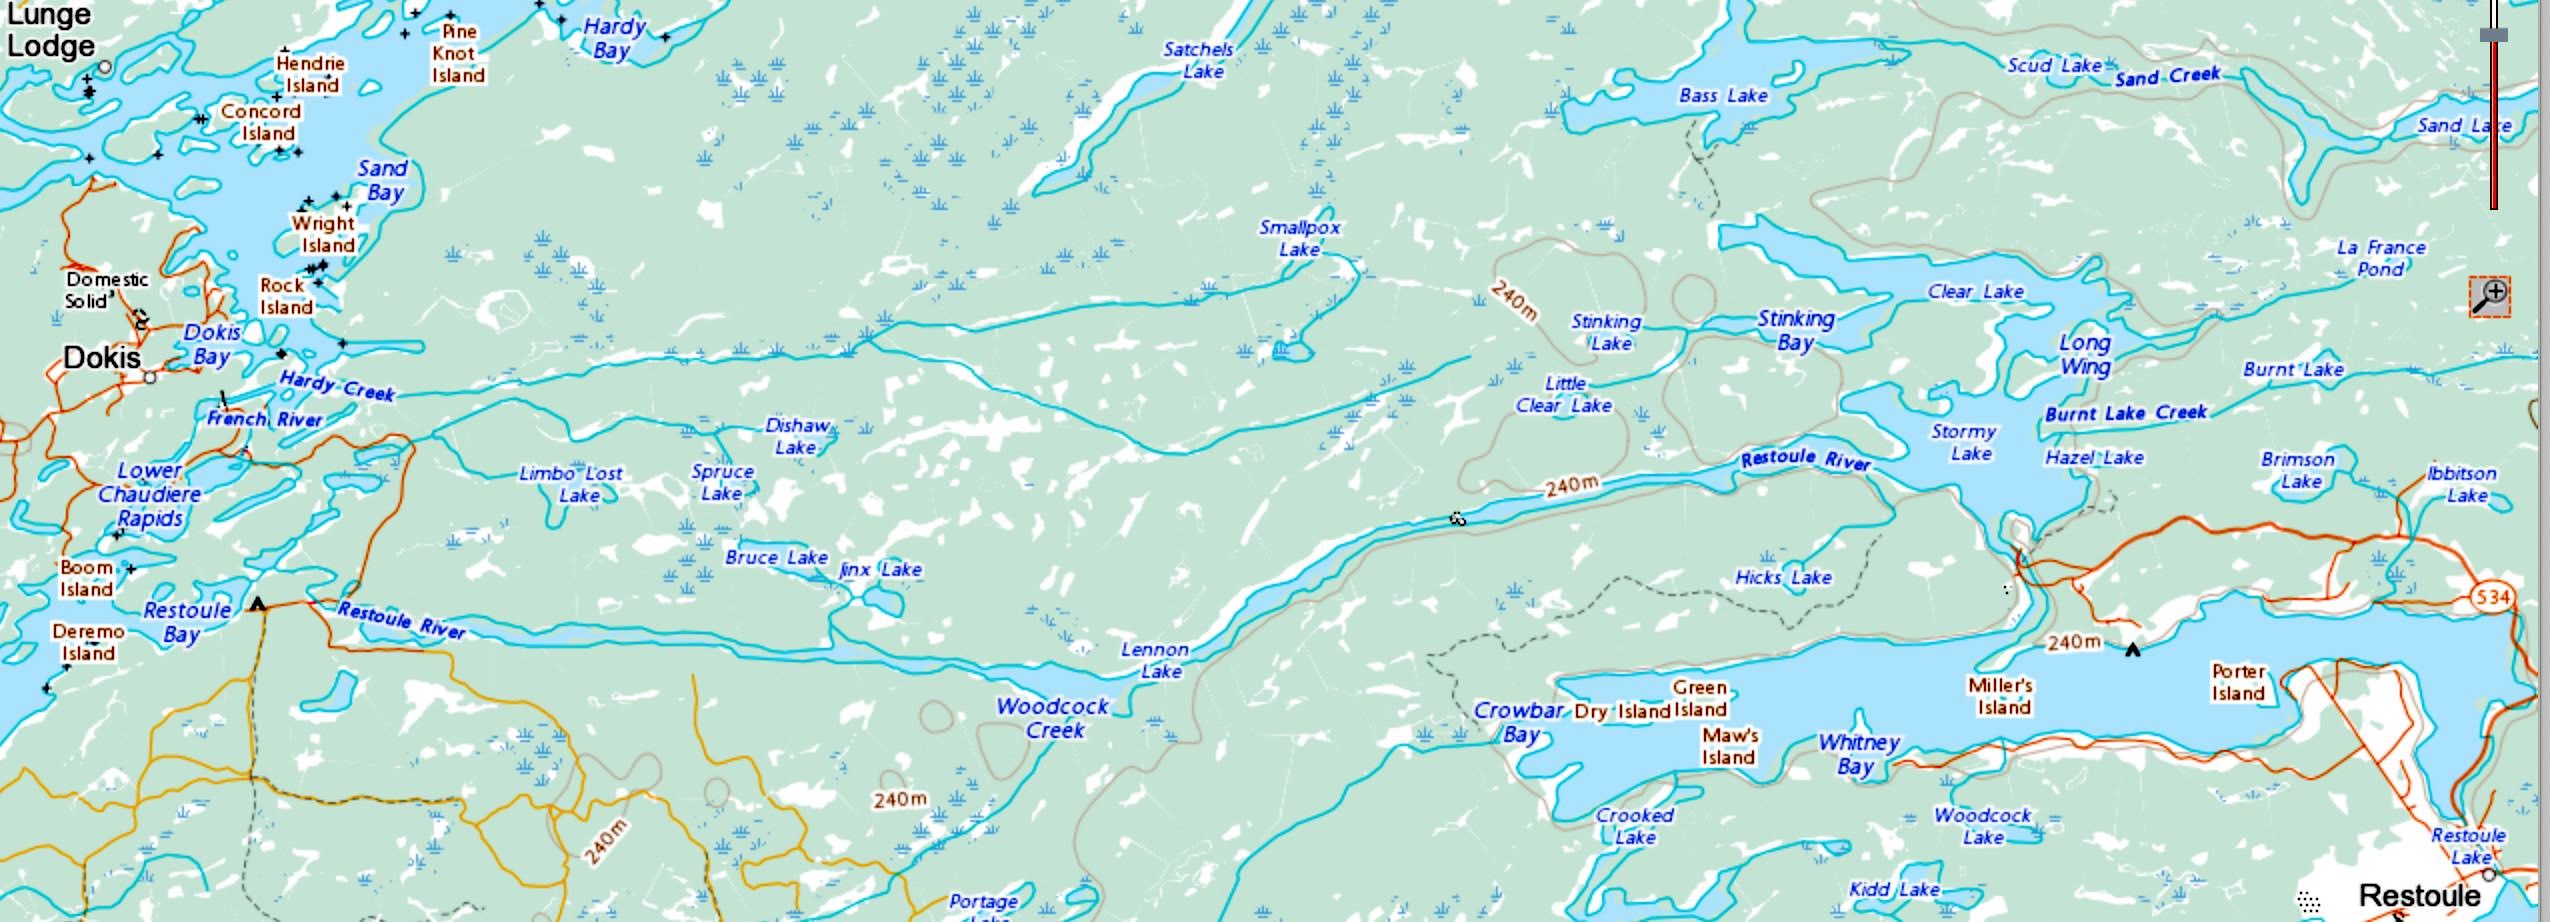 Canoeing The French River From Top To Bottom Intro Logistics Planning And Maps Ramblin Boy